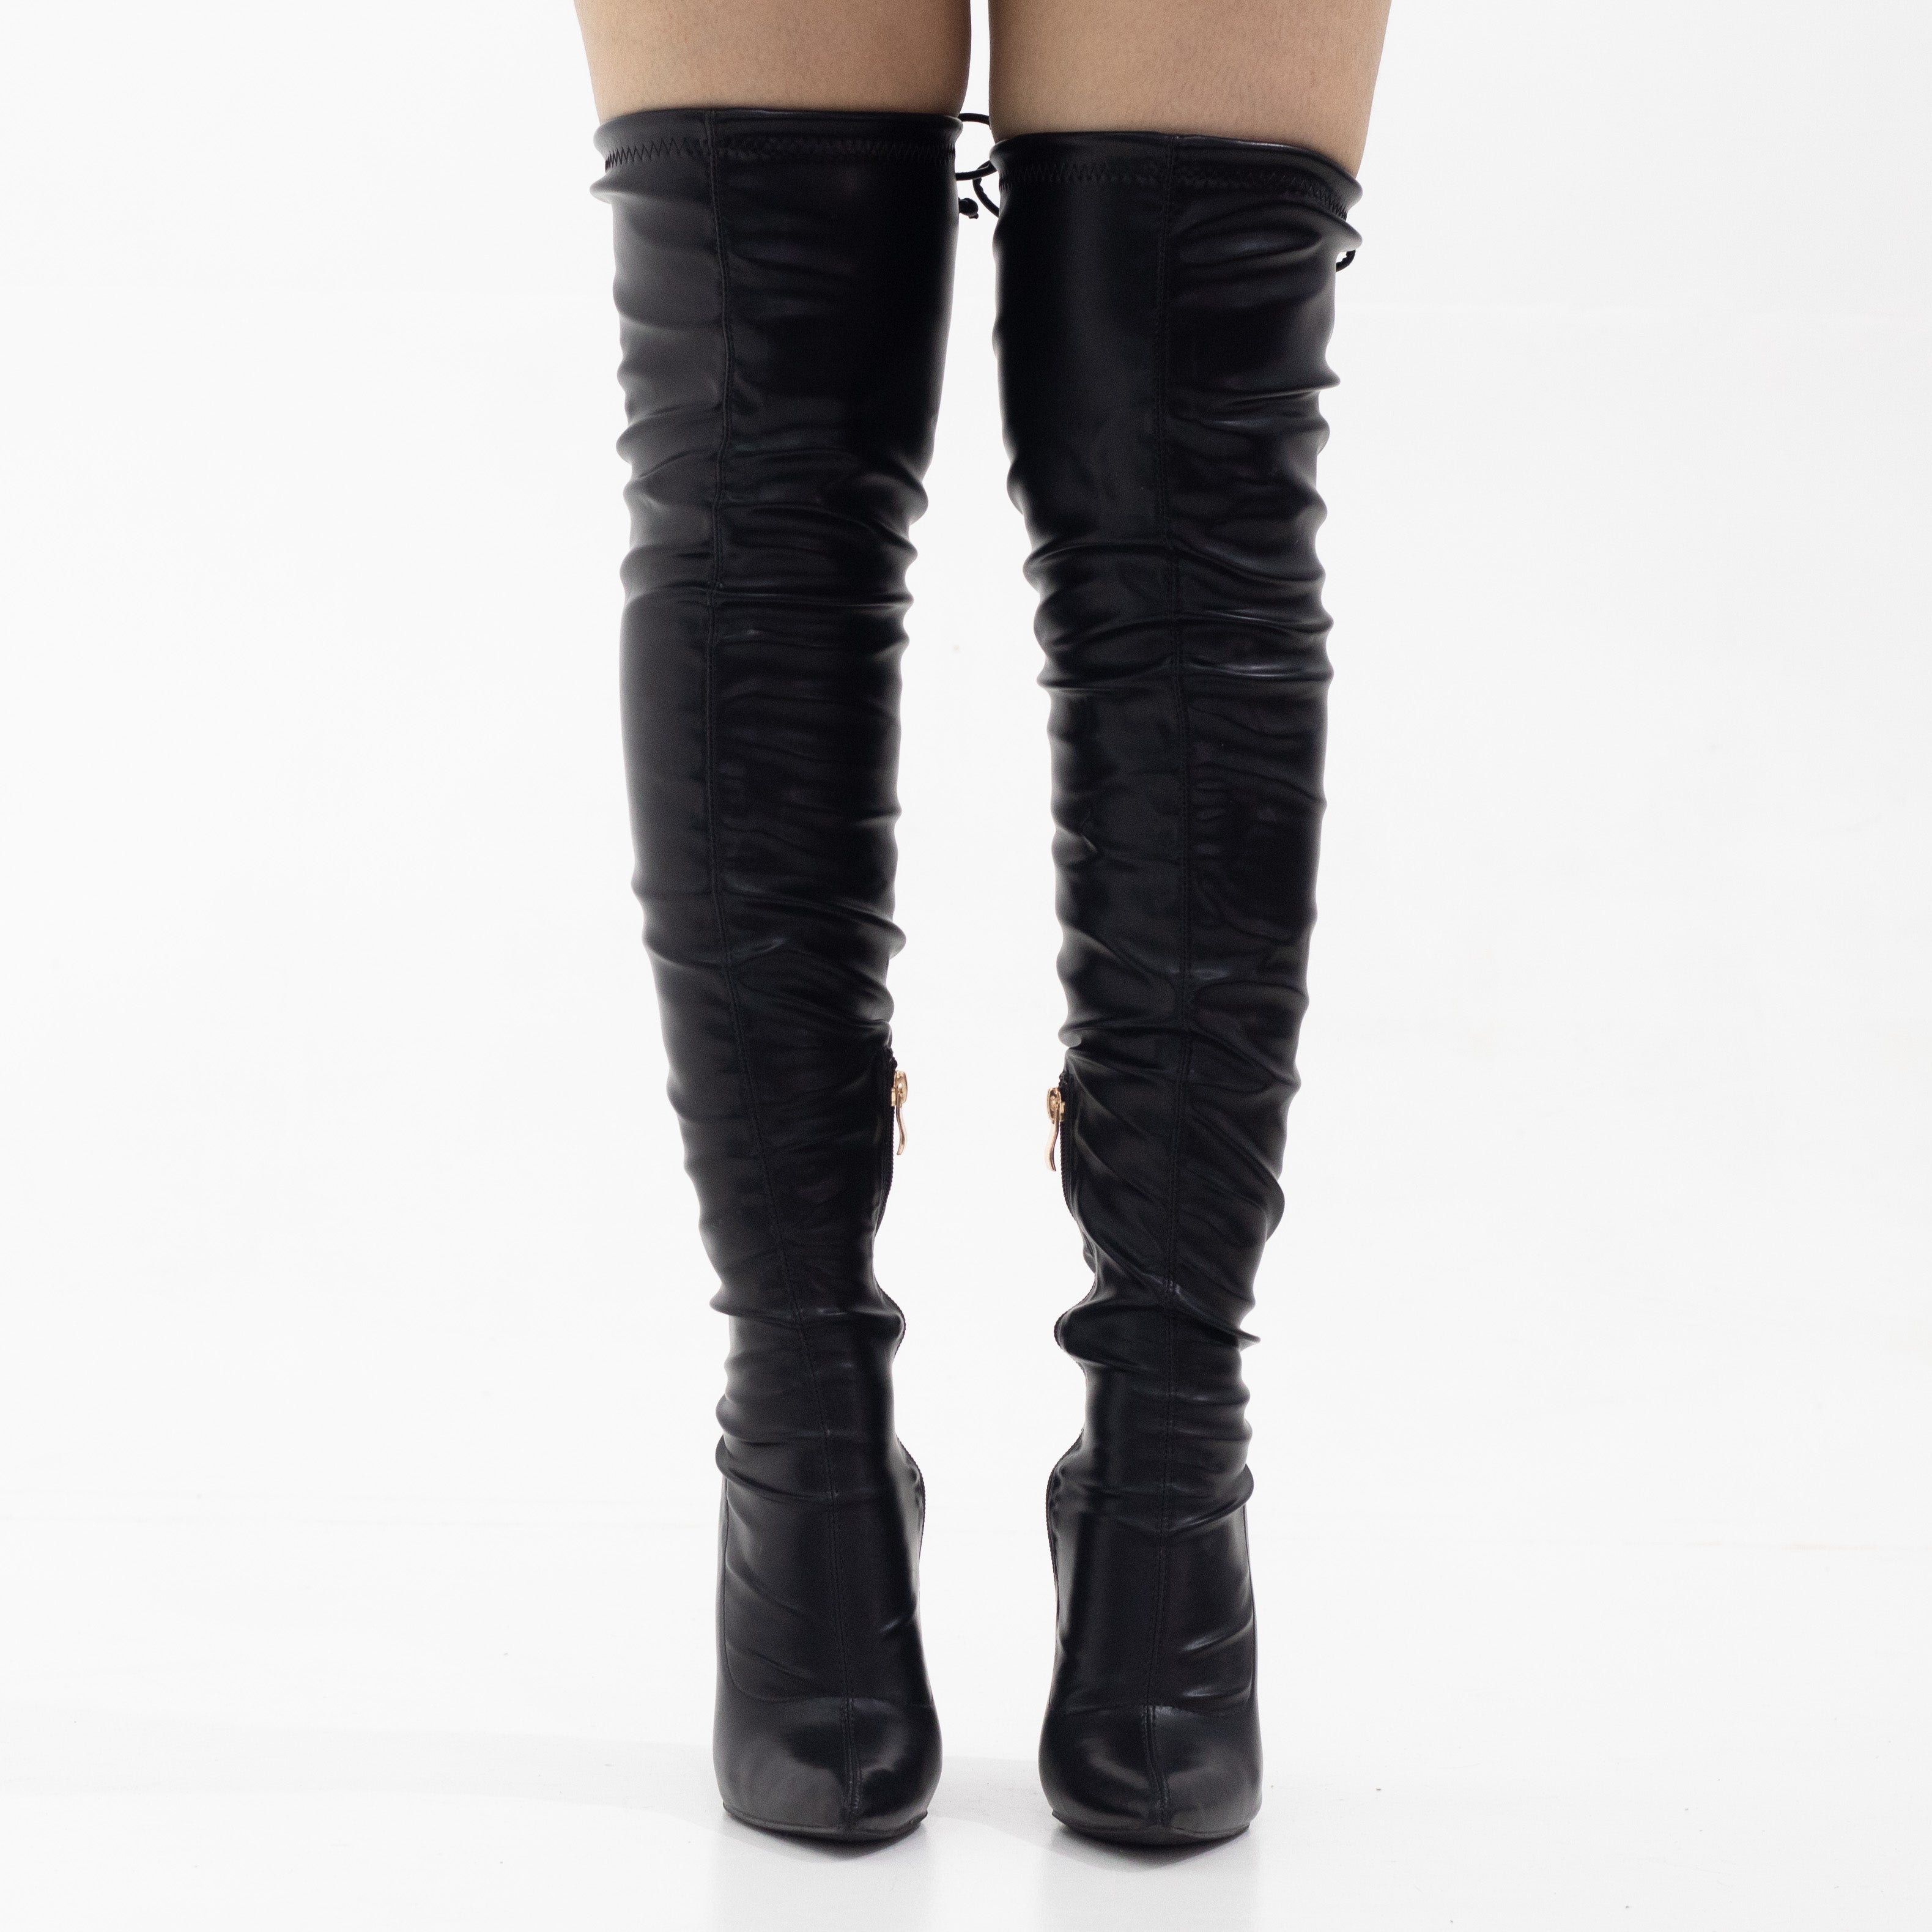 Black thigh high pointy high 10.5cm heel boot tomian